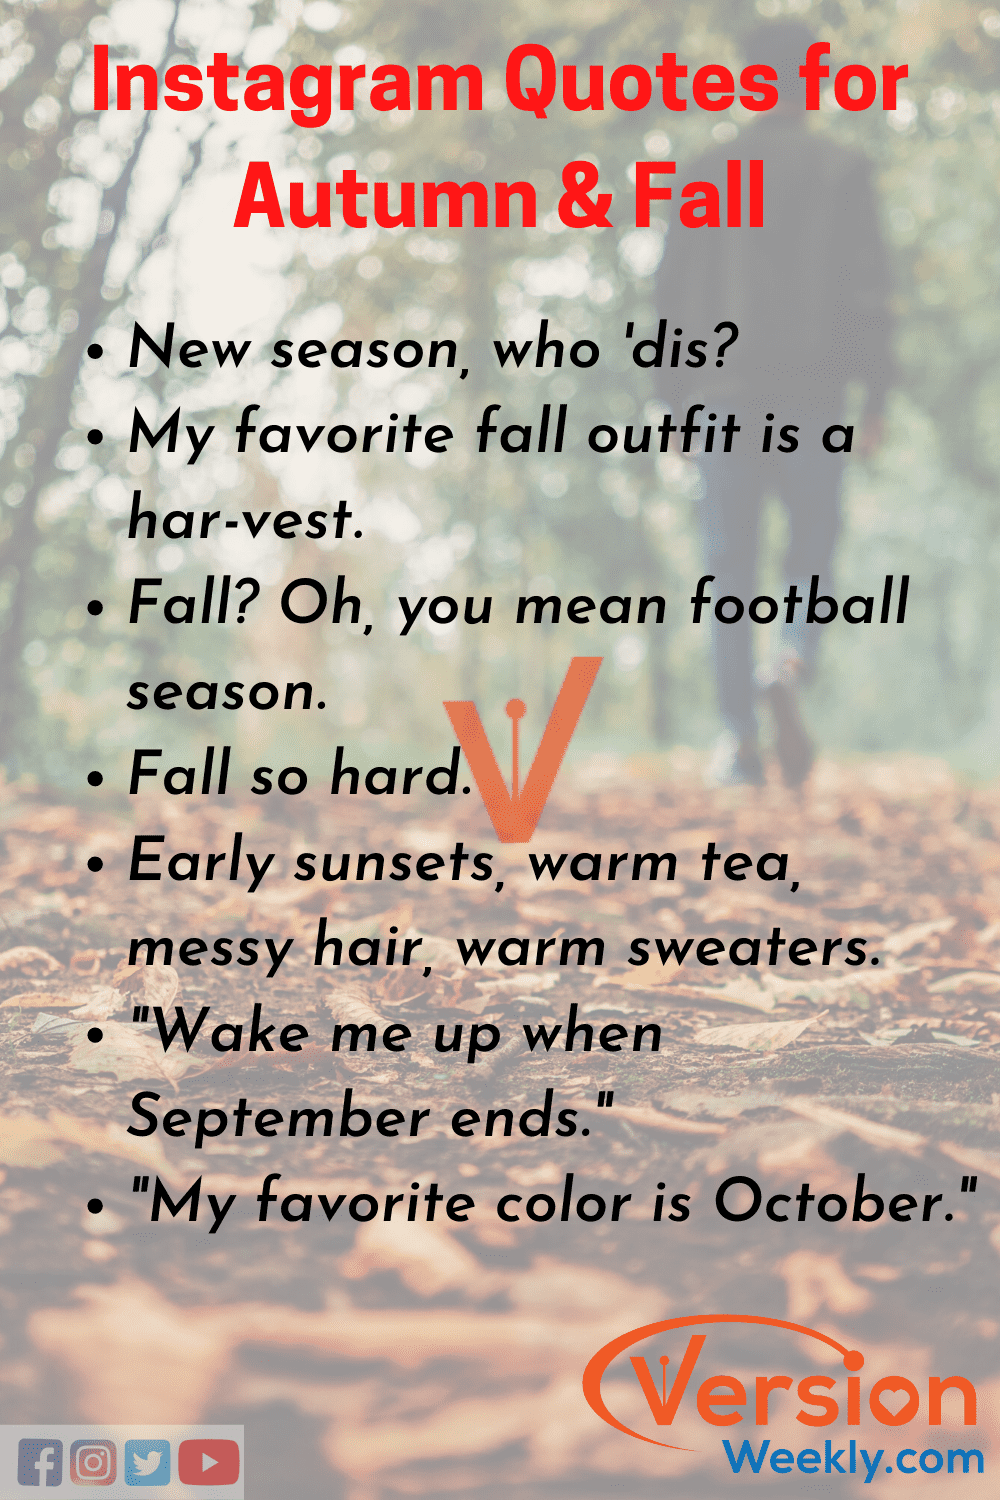 Autumn captions & fall activity quotes for IG